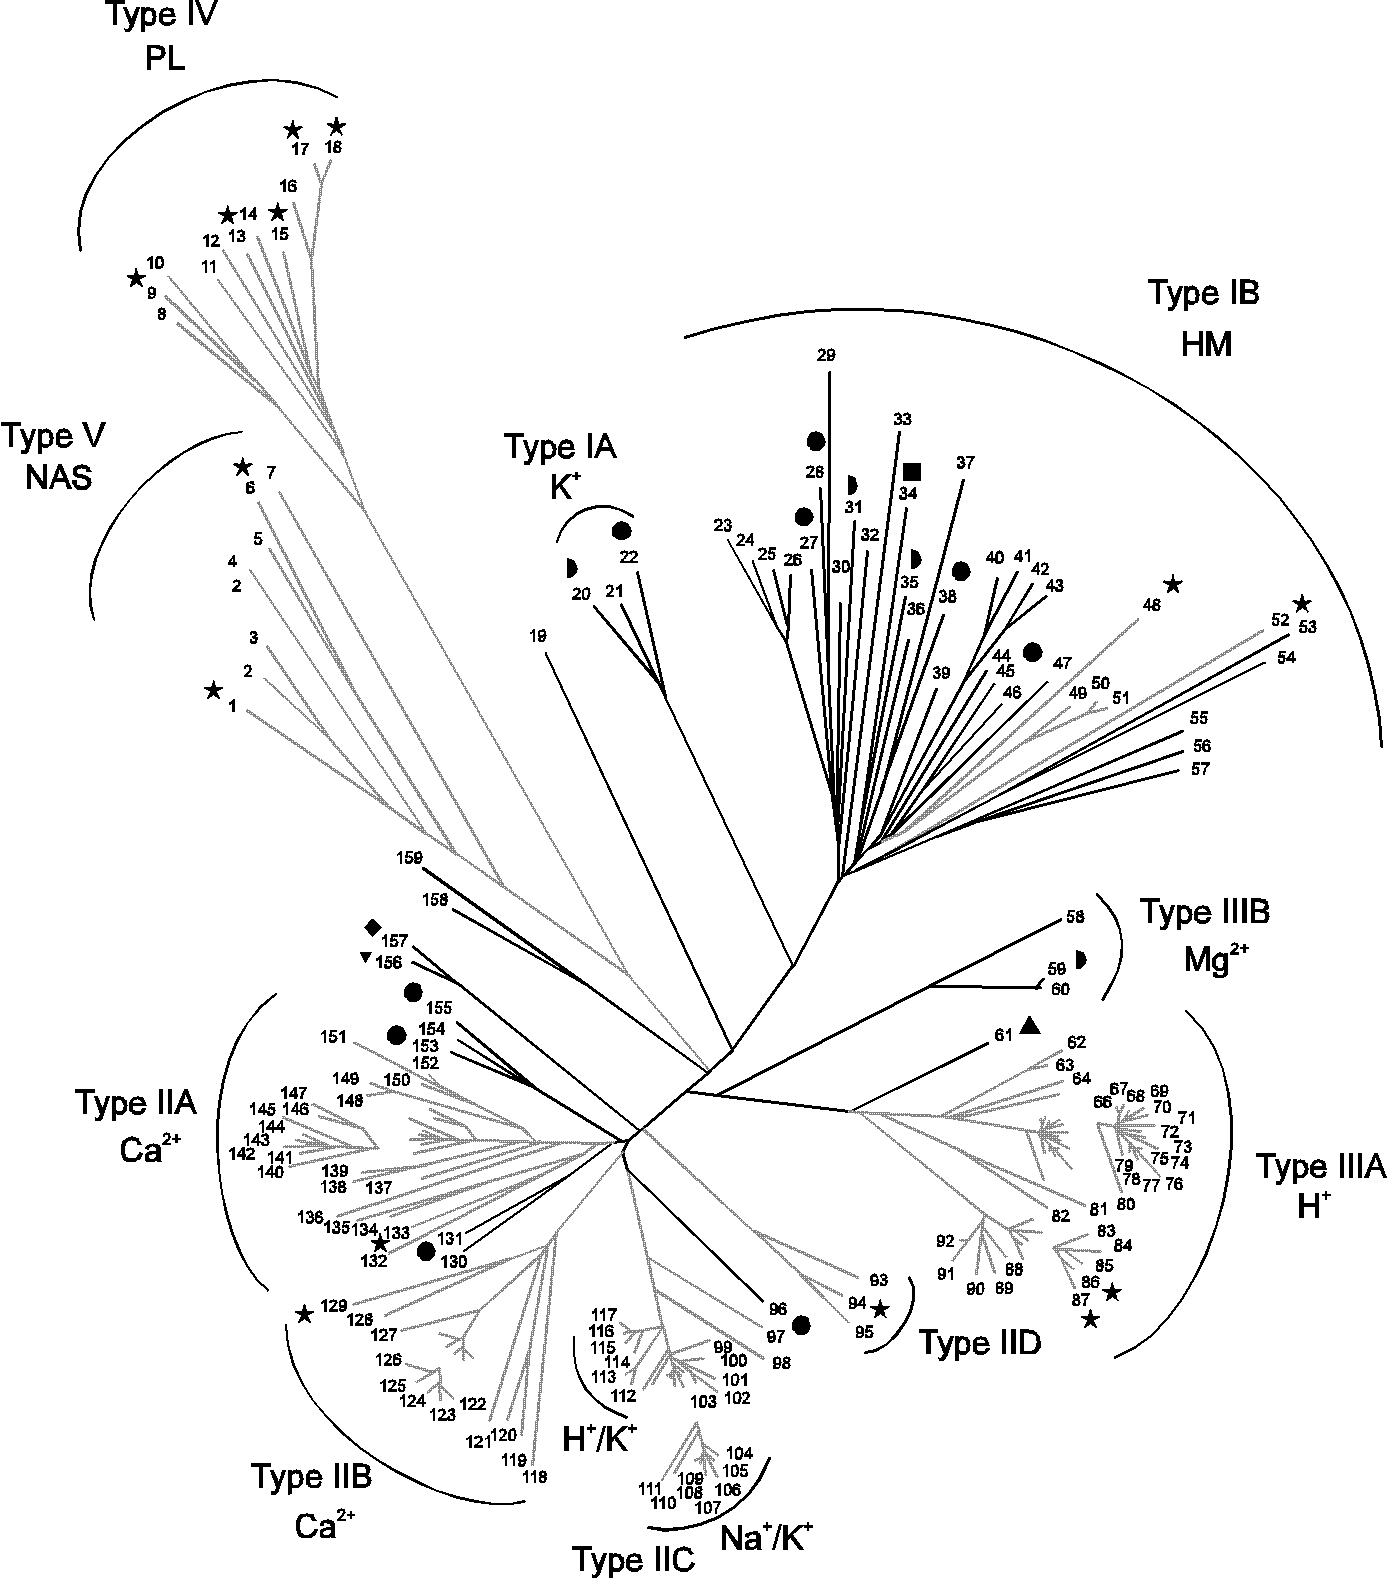 Phylogenetic tree of 159 P-type ATPase sequences